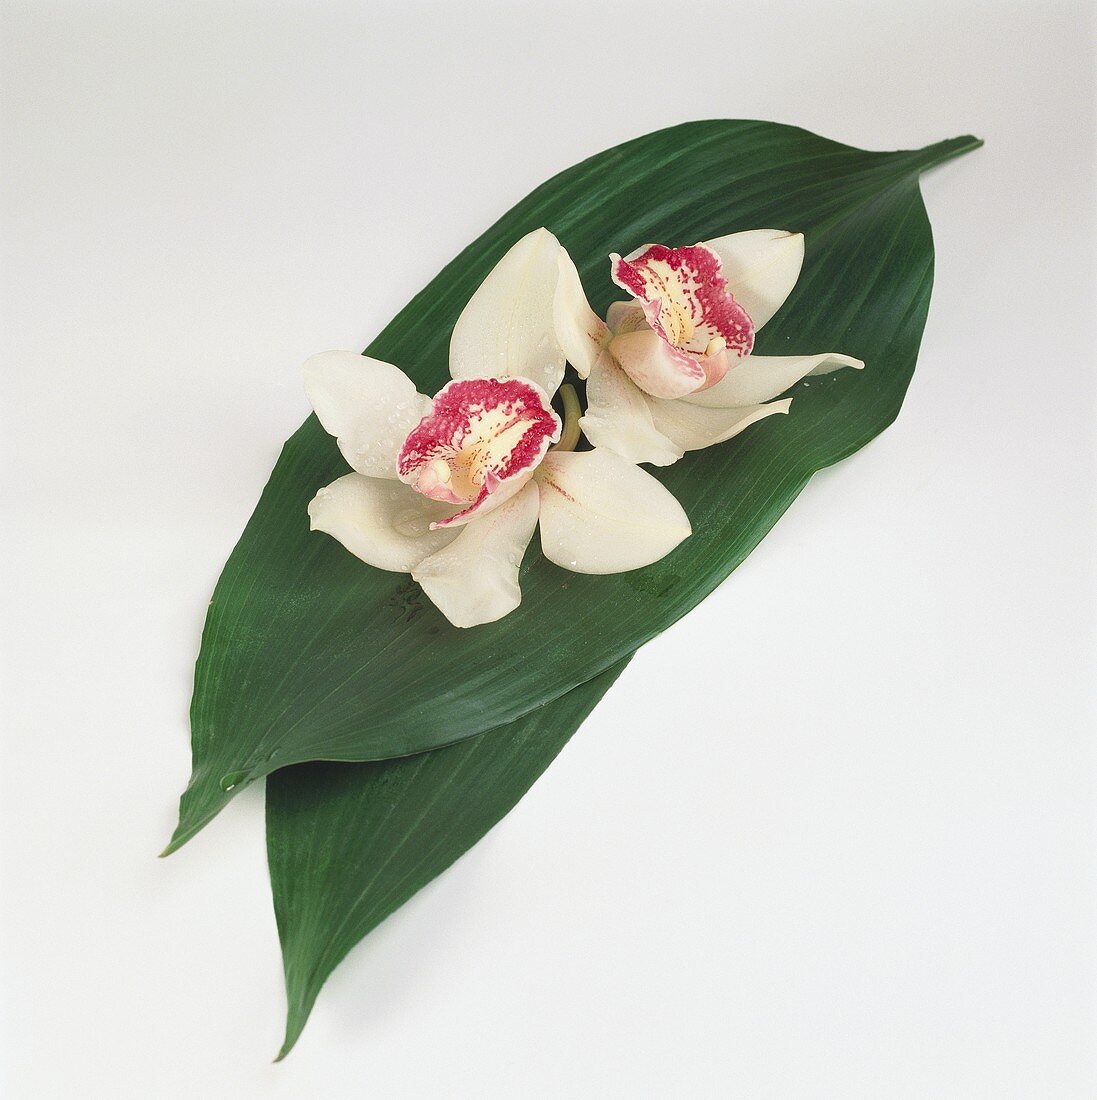 Palm leaves with white orchids as table decoration